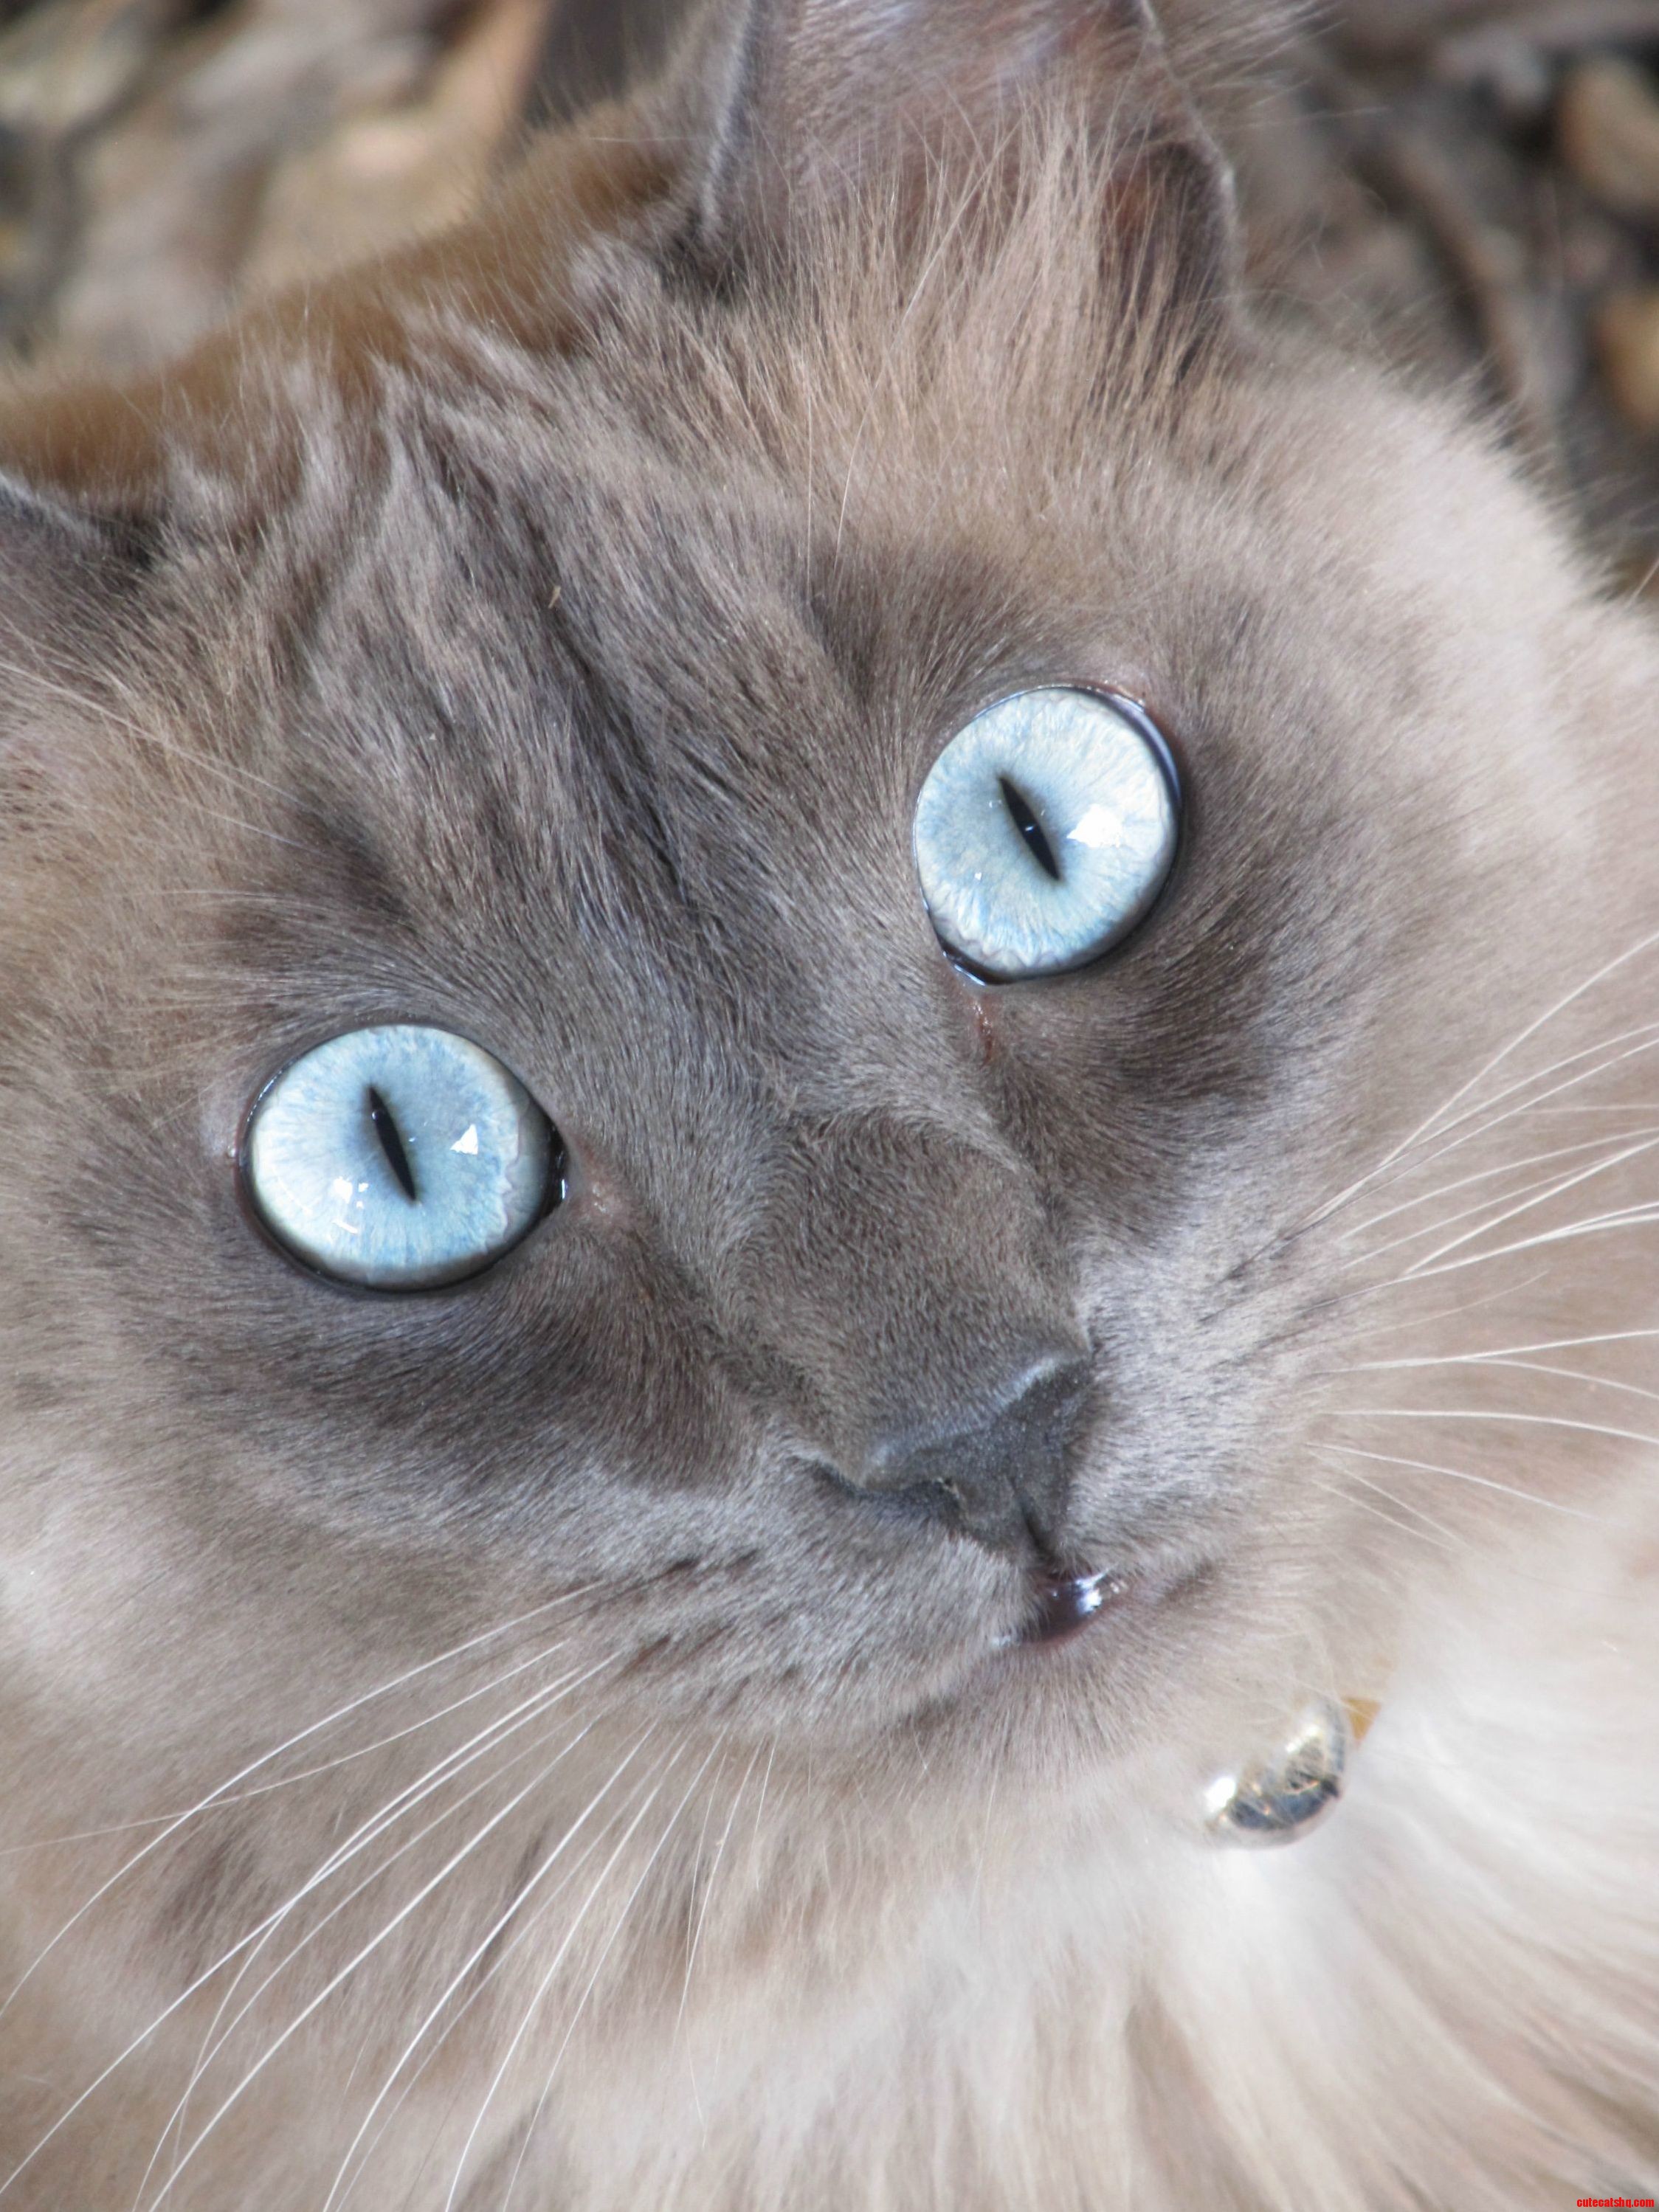 Captivating image of my lil boys baby blues.